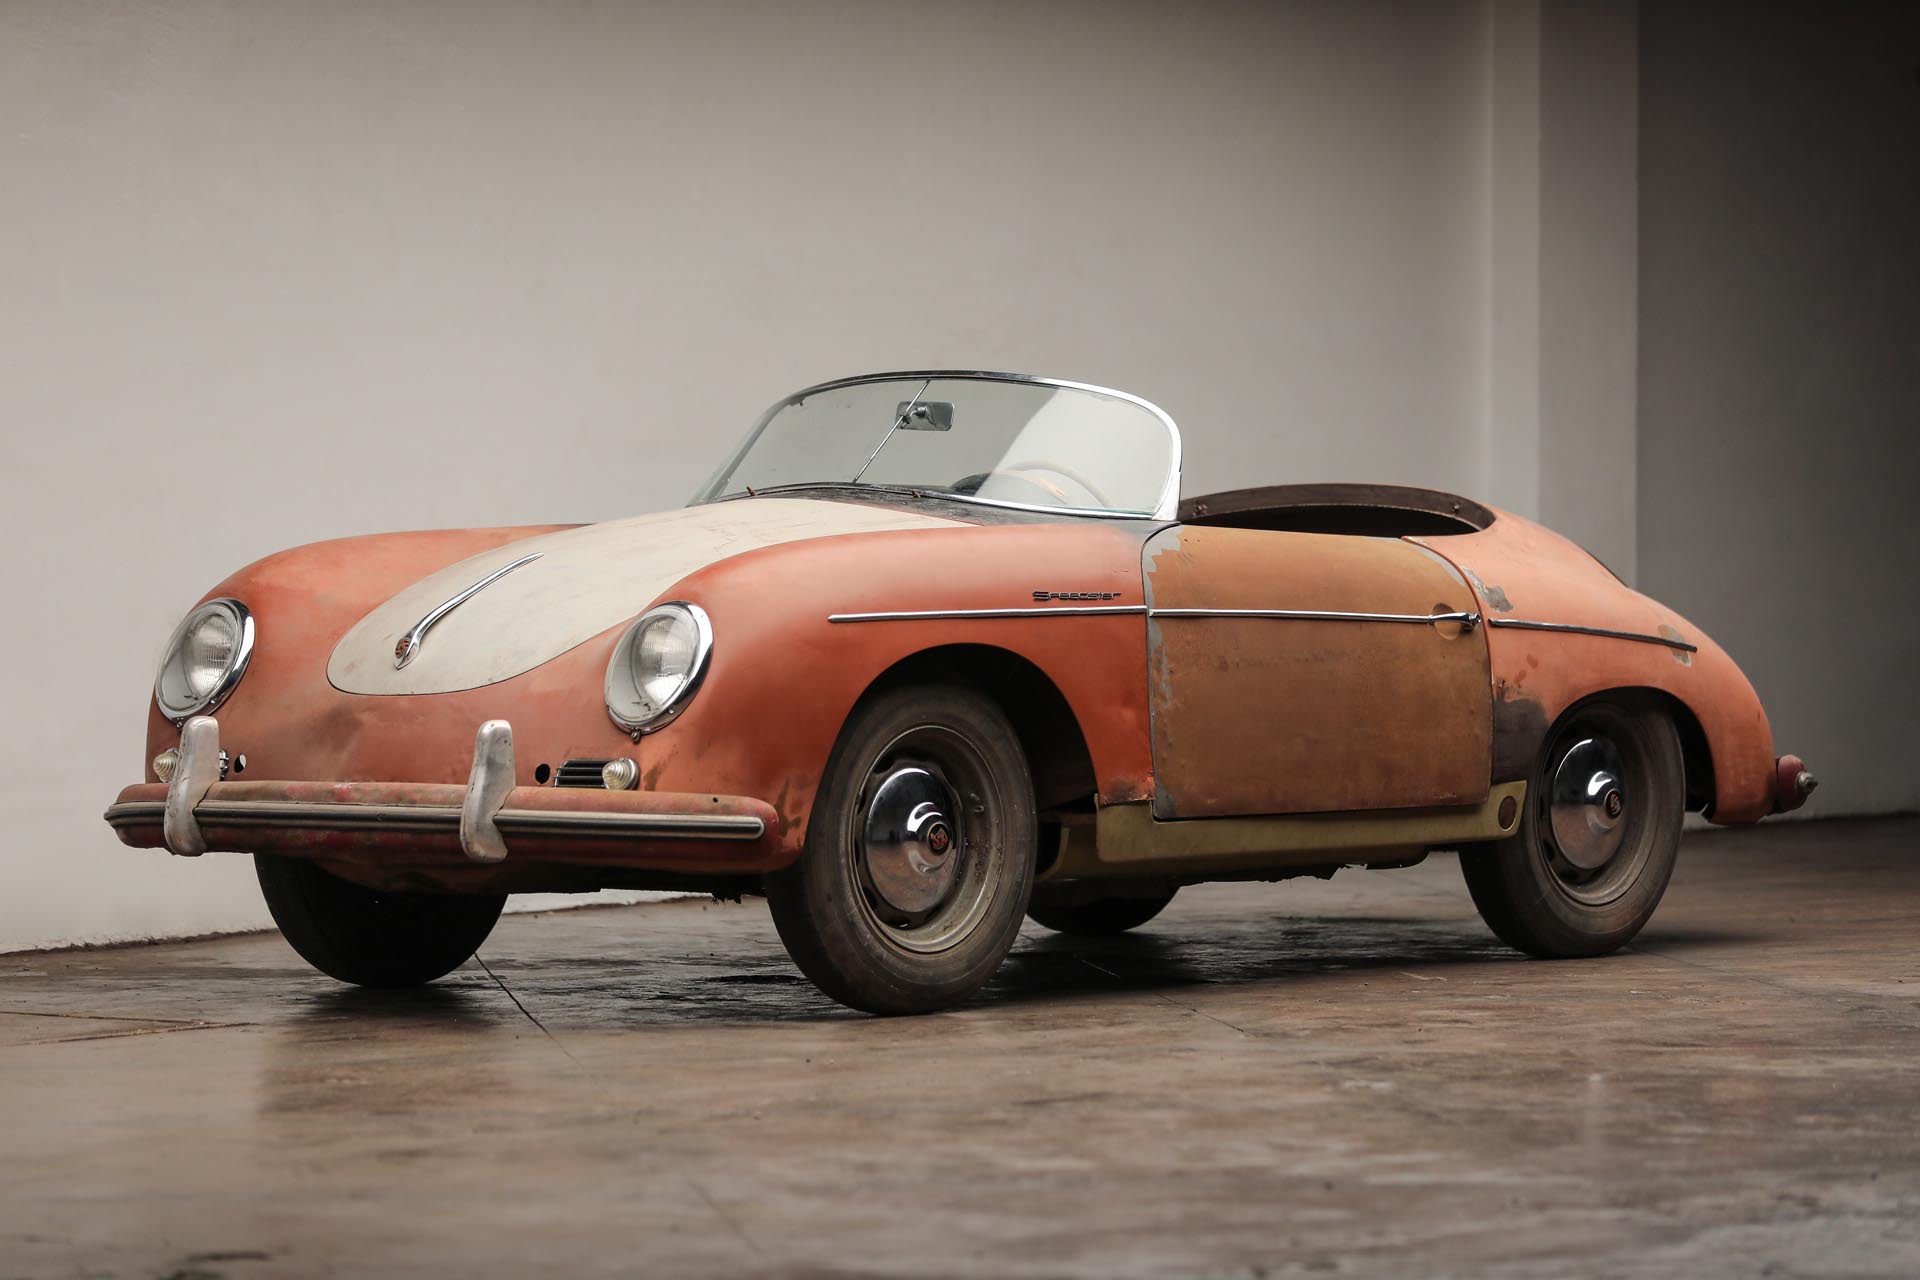 Silodrome: This Porsche Speedster Is The Best Porsche Project Car For Sale On Earth Right Now